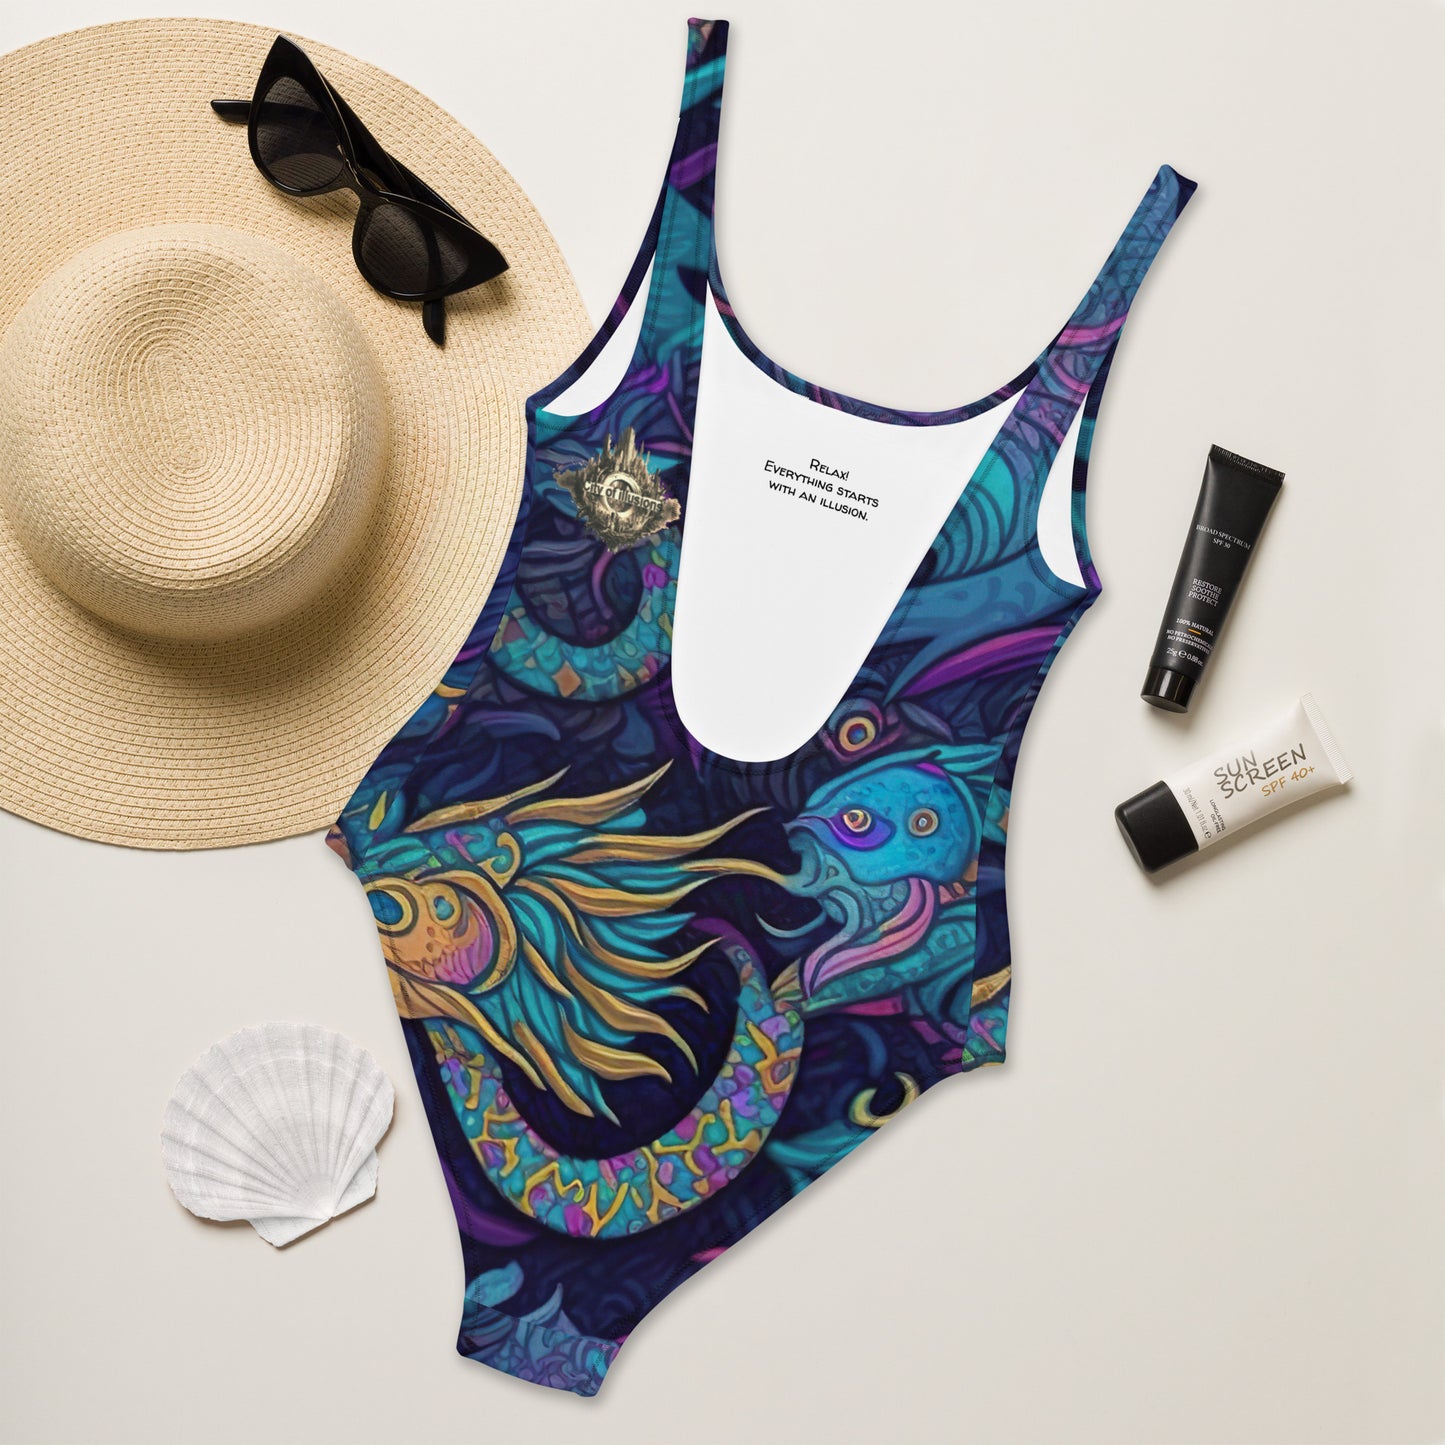 One Piece Swimsuit: Ayahuasca visions